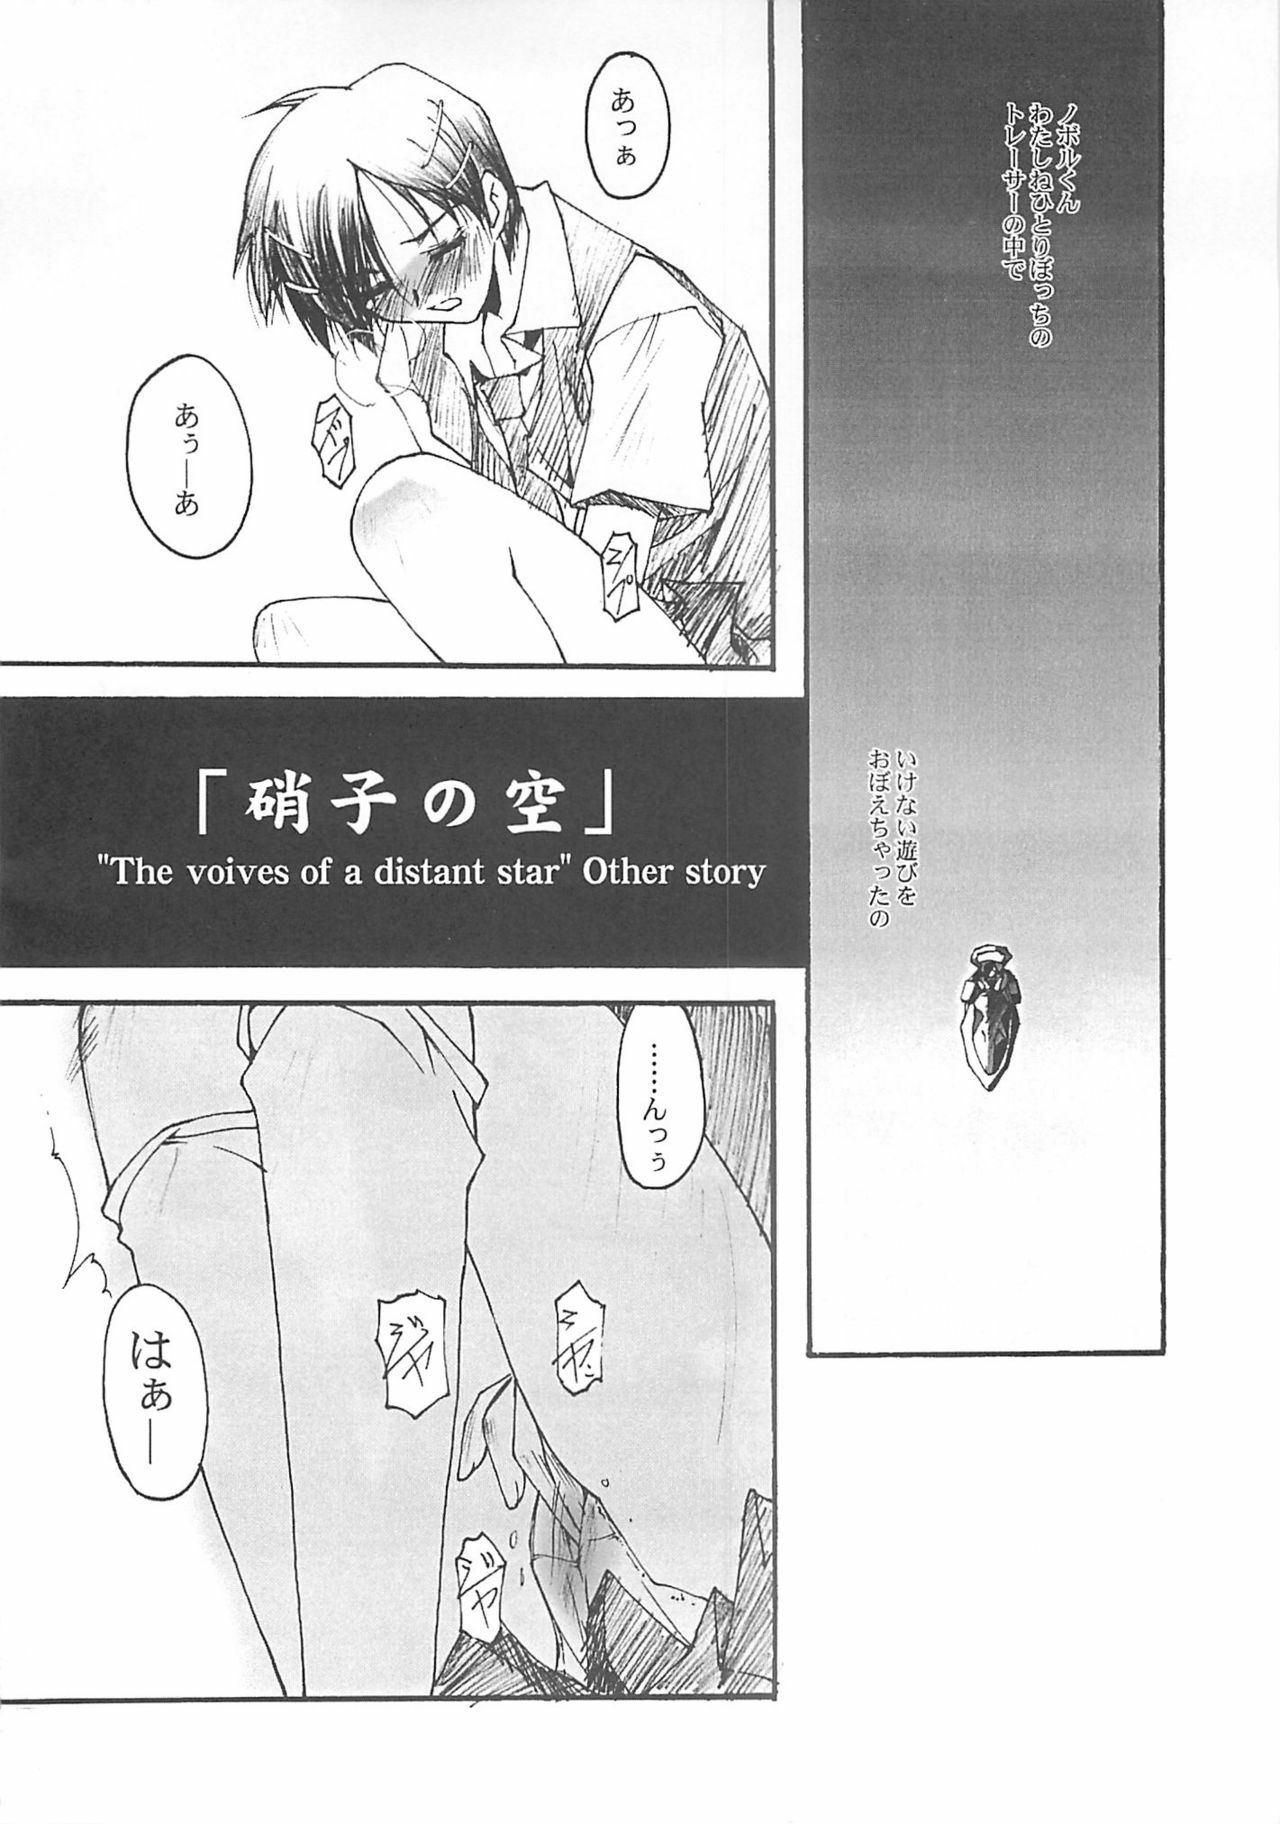 [RYU-SEKI-DO (Nagare Hyo-go)] Cut Glass (G-on Riders, Hoshi no Koe: The Voices of a Distant Star) page 23 full